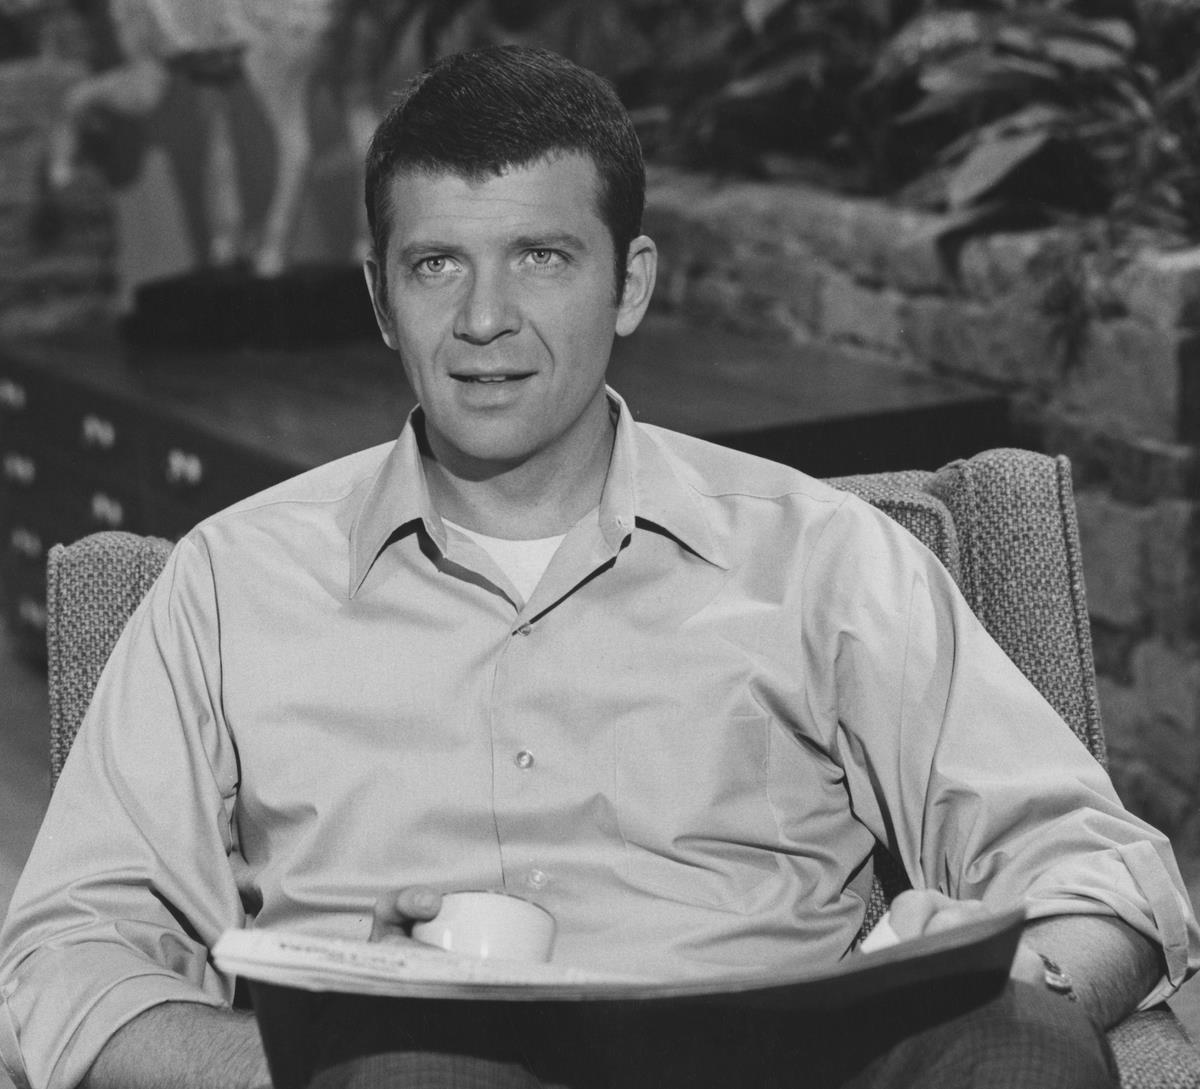 <p>As <i>Father Knows Best</i> rose in popularity in the late 1950s, future TV dads used the show as their footstool. Robert Reed, who later played Mike Brady in <i>The Brady Bunch</i>, acted as Mr. Cameron in the episode "The Imposter." In "Grampa Retires," Herbert Anderson played Verle Wisman. He would later take the role of Henry Mitchell in <i>Dennis the Menace</i>.</p> <p>In the 1958 episode "Betty, the Pioneer Woman," two future sitcom dads appeared. William Schallert, who later played Martin Lane on <i>The Patty Duke Show</i>, acted as Jennings. Then there was Dick York, better known as Darrin Stephens in <i>Bewitched</i>. He played Tom Wentworth in a <i>Father Knows Best</i> episode.</p>